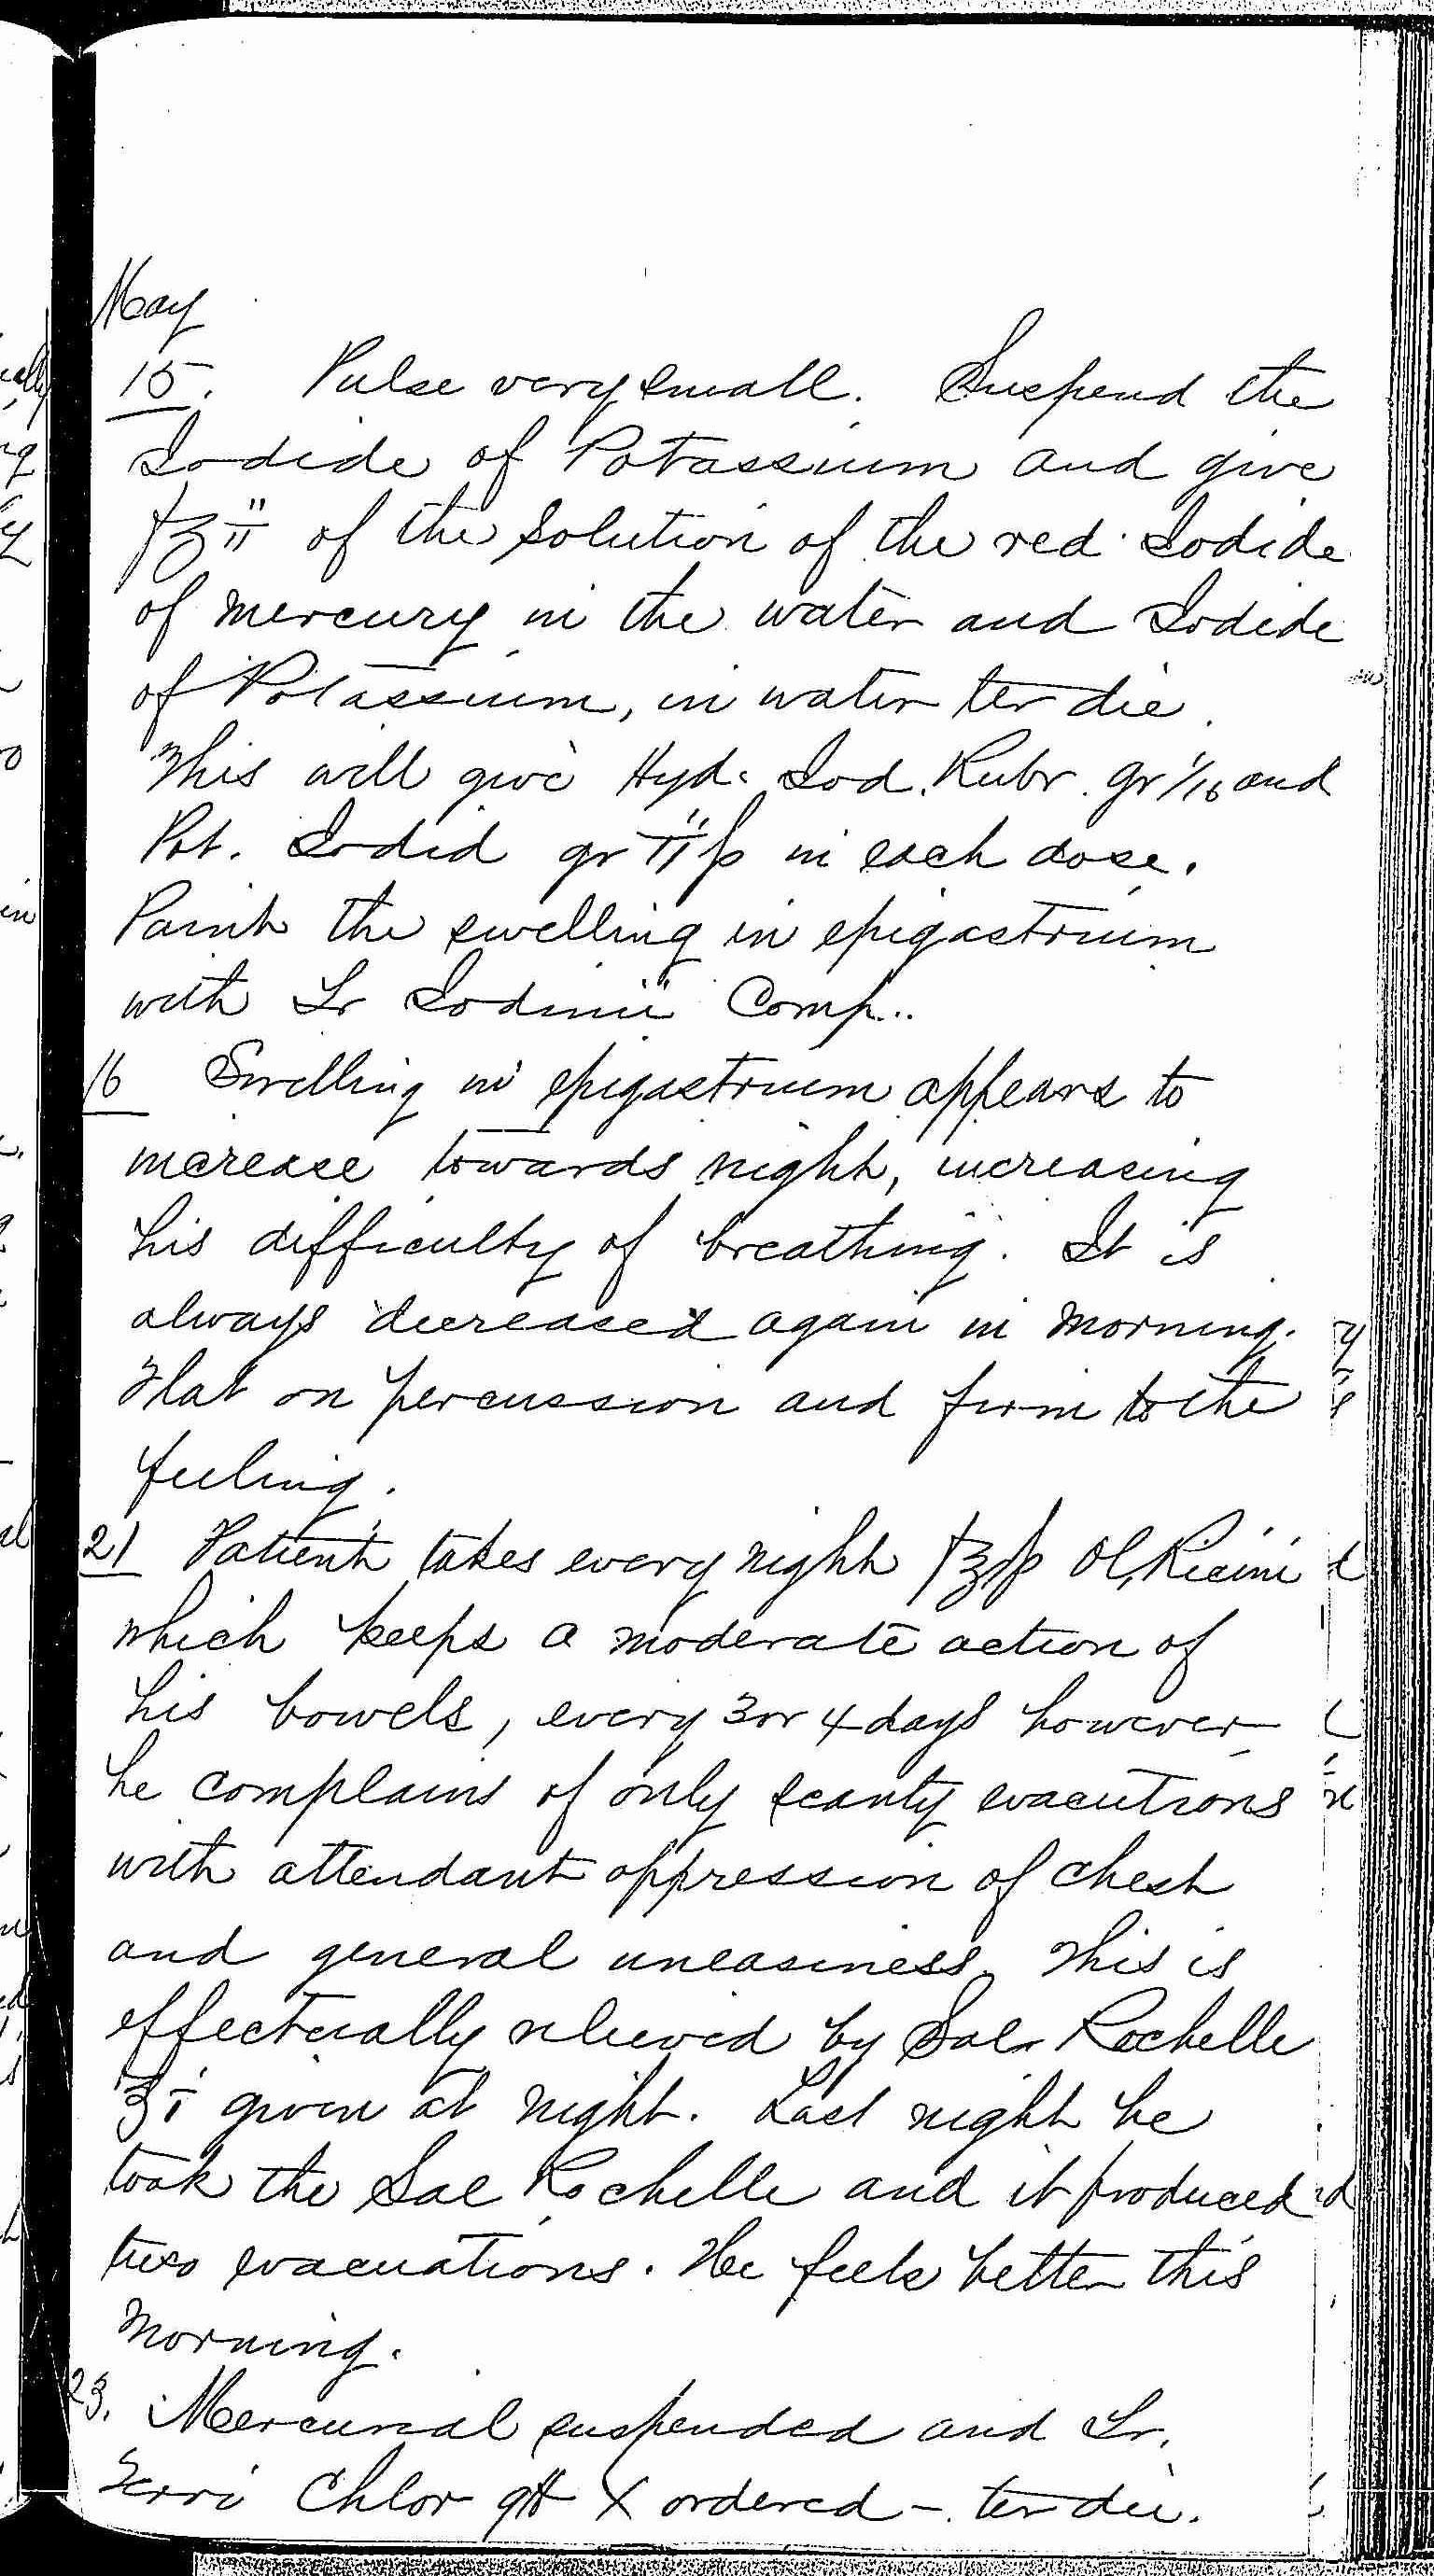 Entry for Charles Johnson (page 13 of 15) in the log Hospital Tickets and Case Papers - Naval Hospital - Washington, D.C. - 1868-69